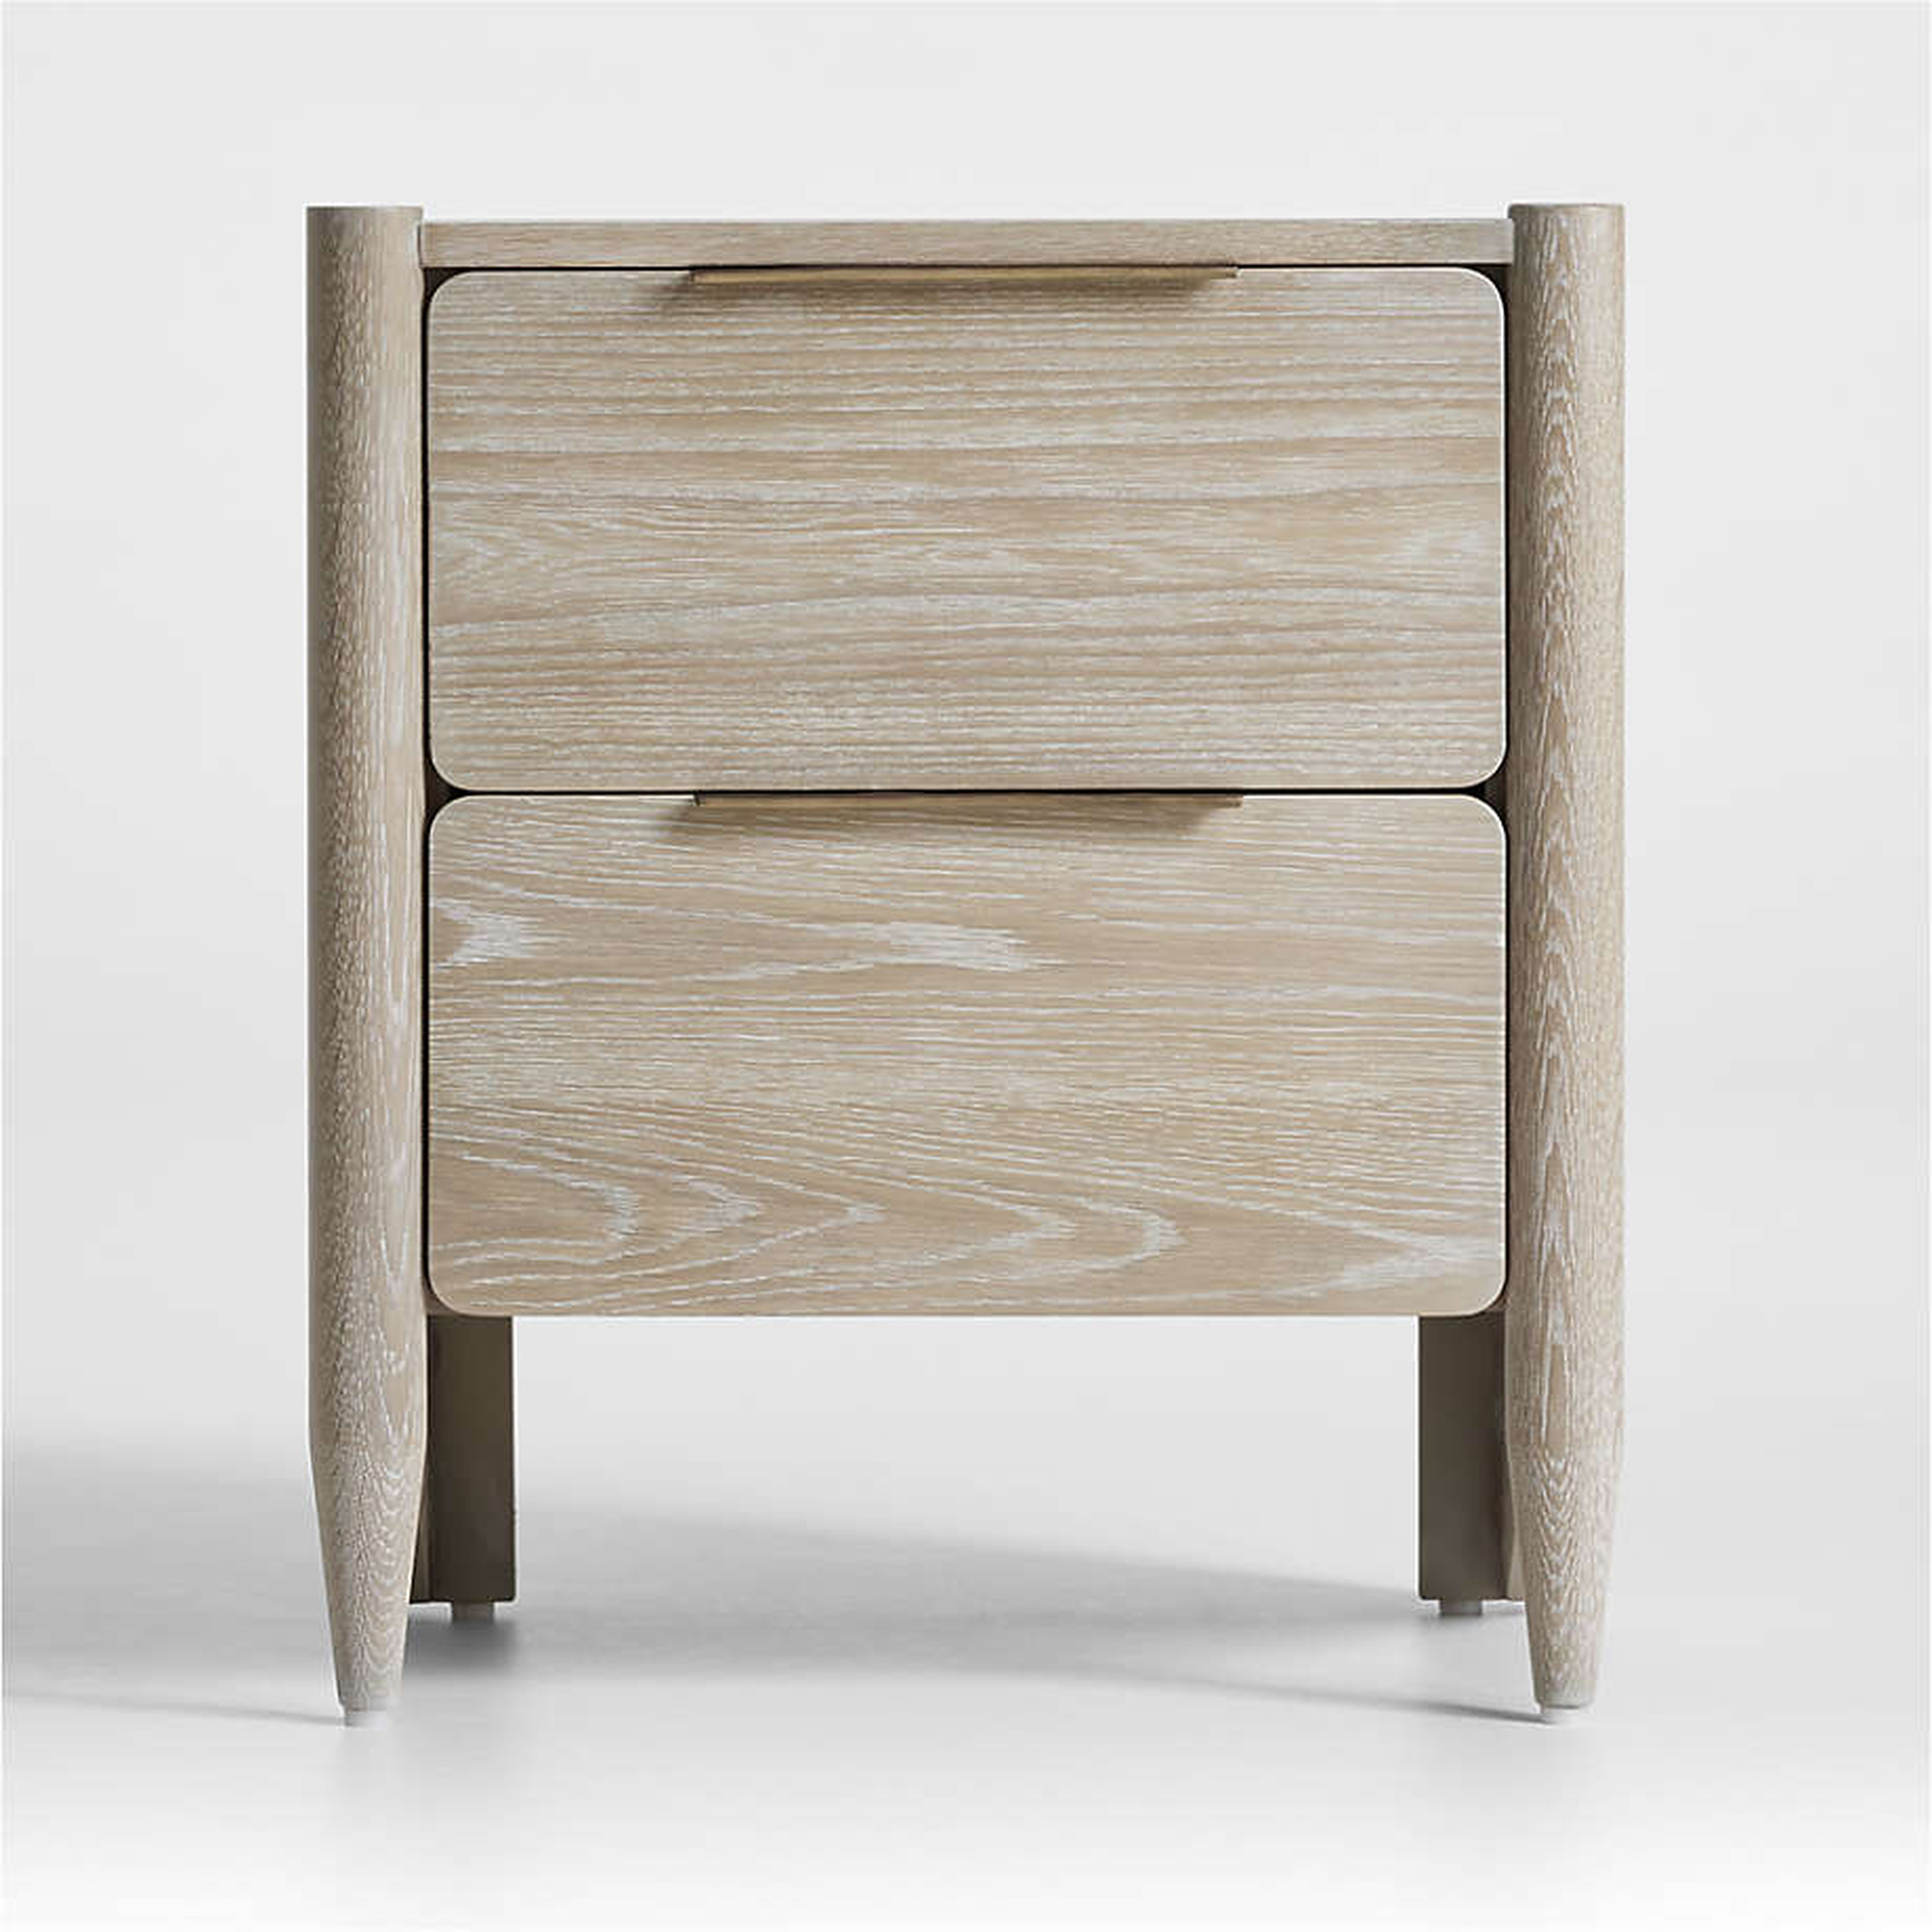 Casa White Oak Wood Nightstand with Drawers - Crate and Barrel